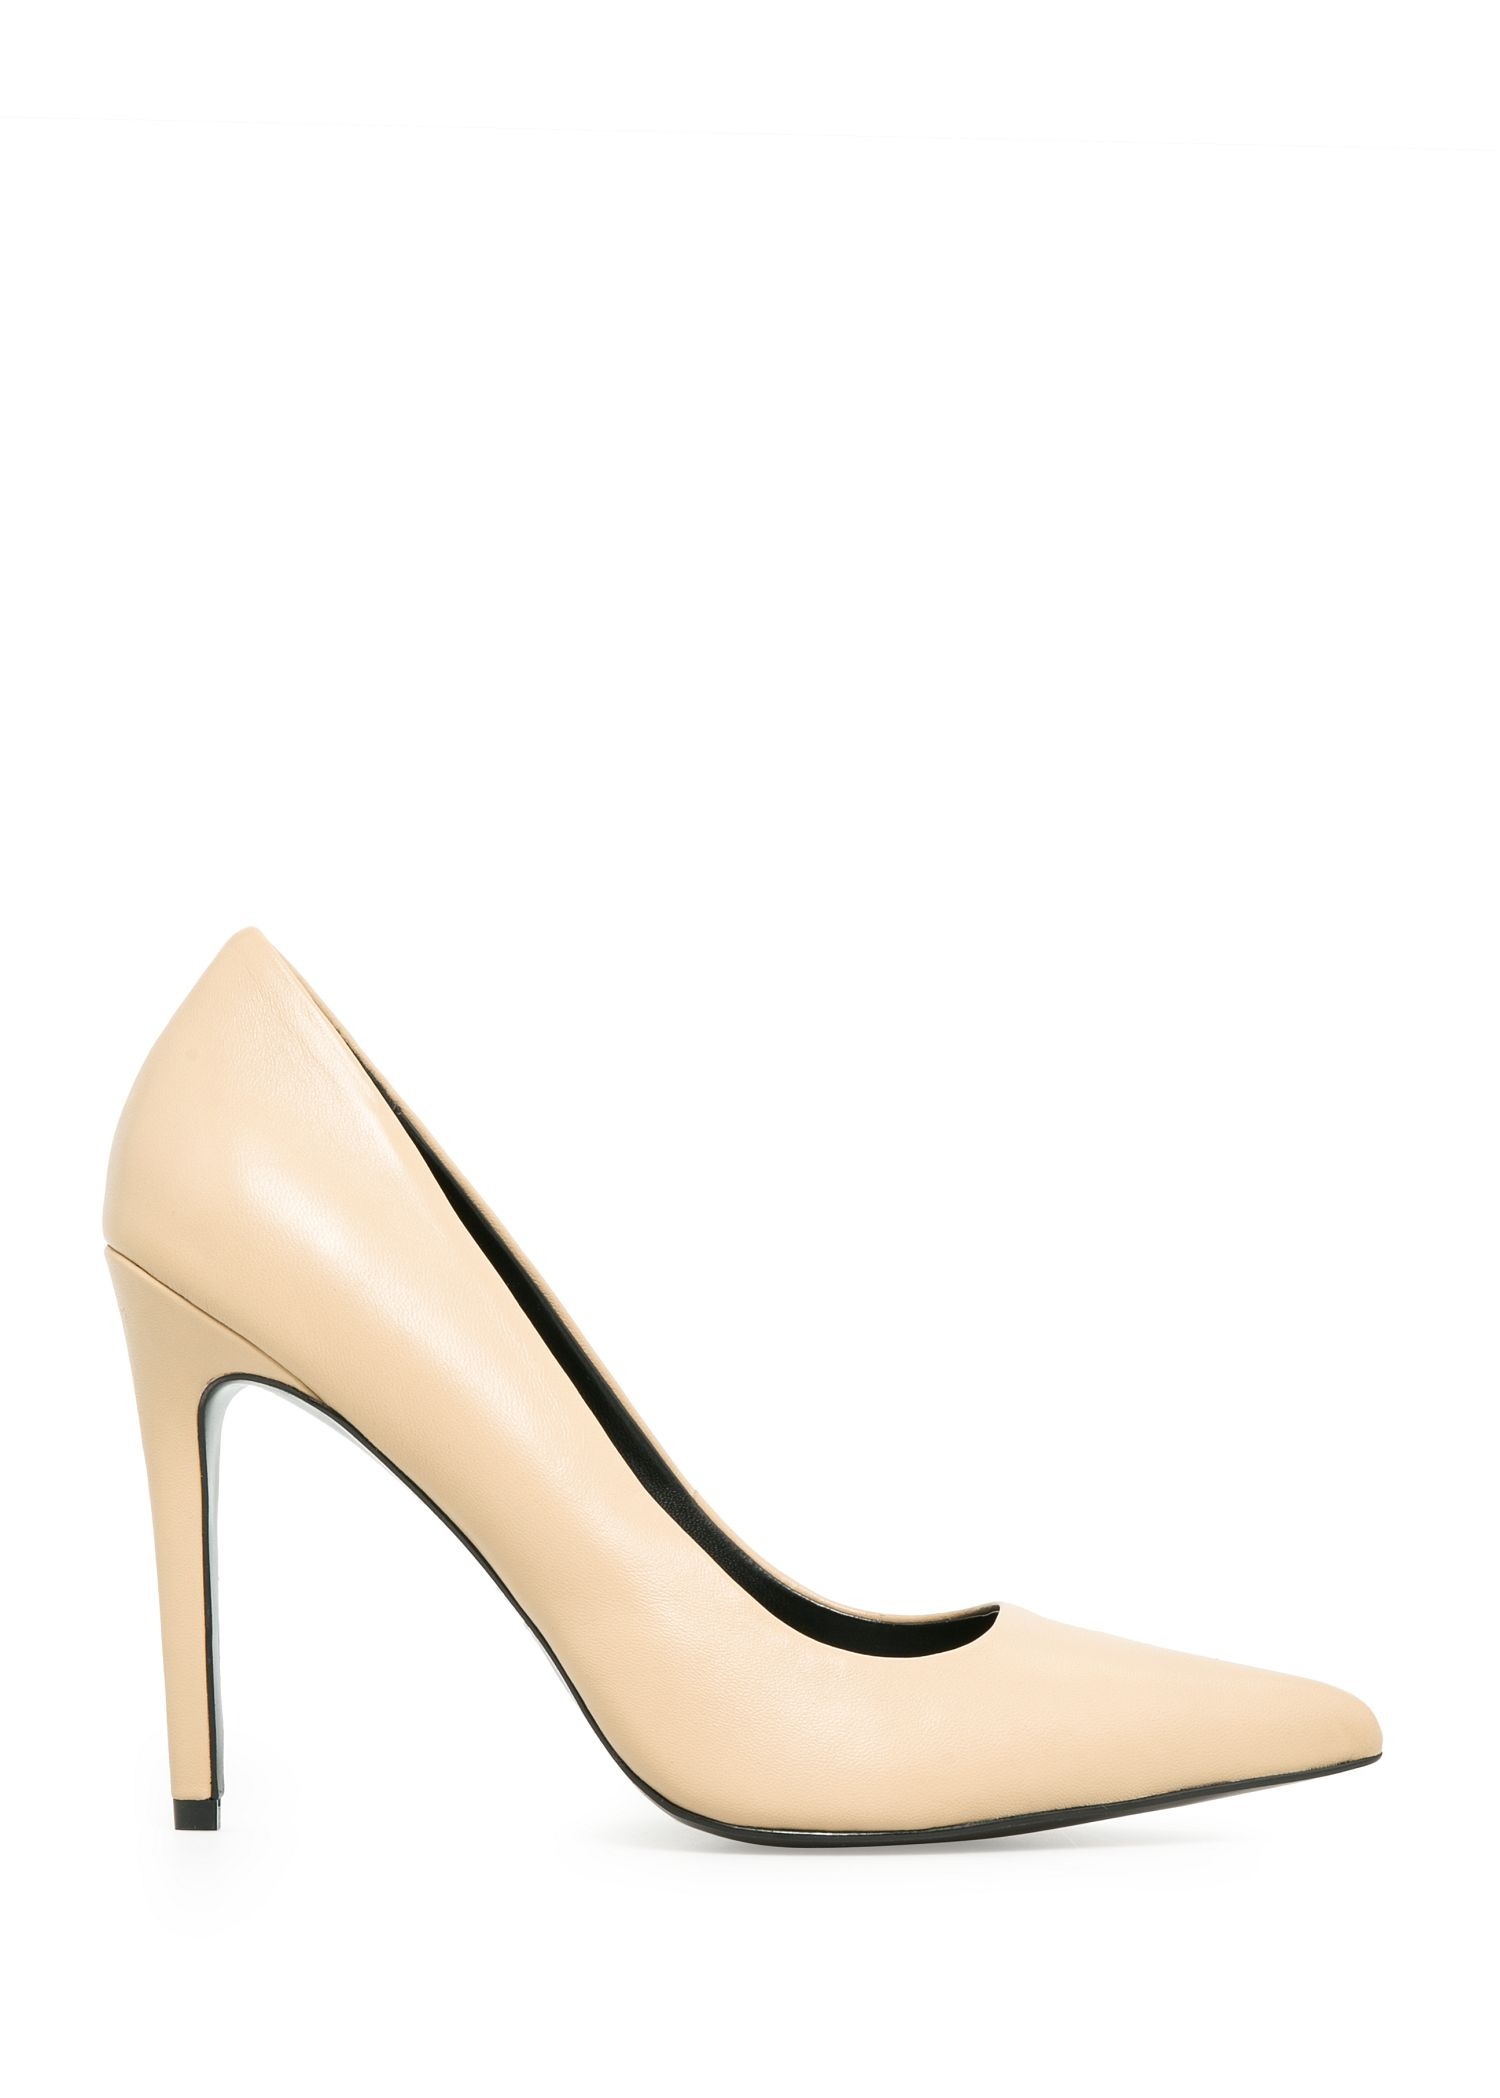 Mango Leather Pumps in Beige (Natural 